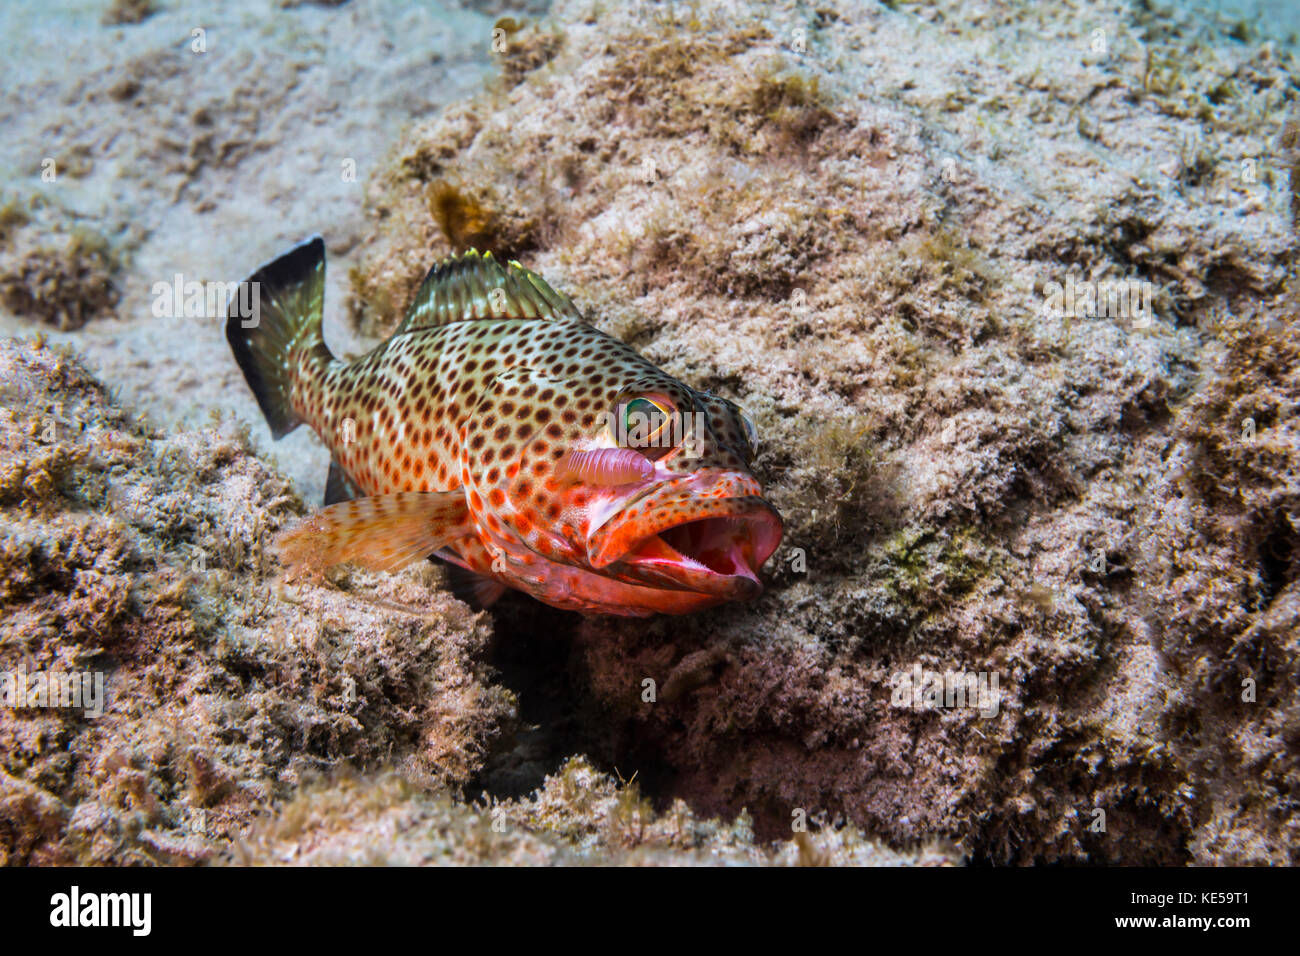 Red hind with shrimp attached to face in St. Croix, U.S. Virgin Islands. Stock Photo